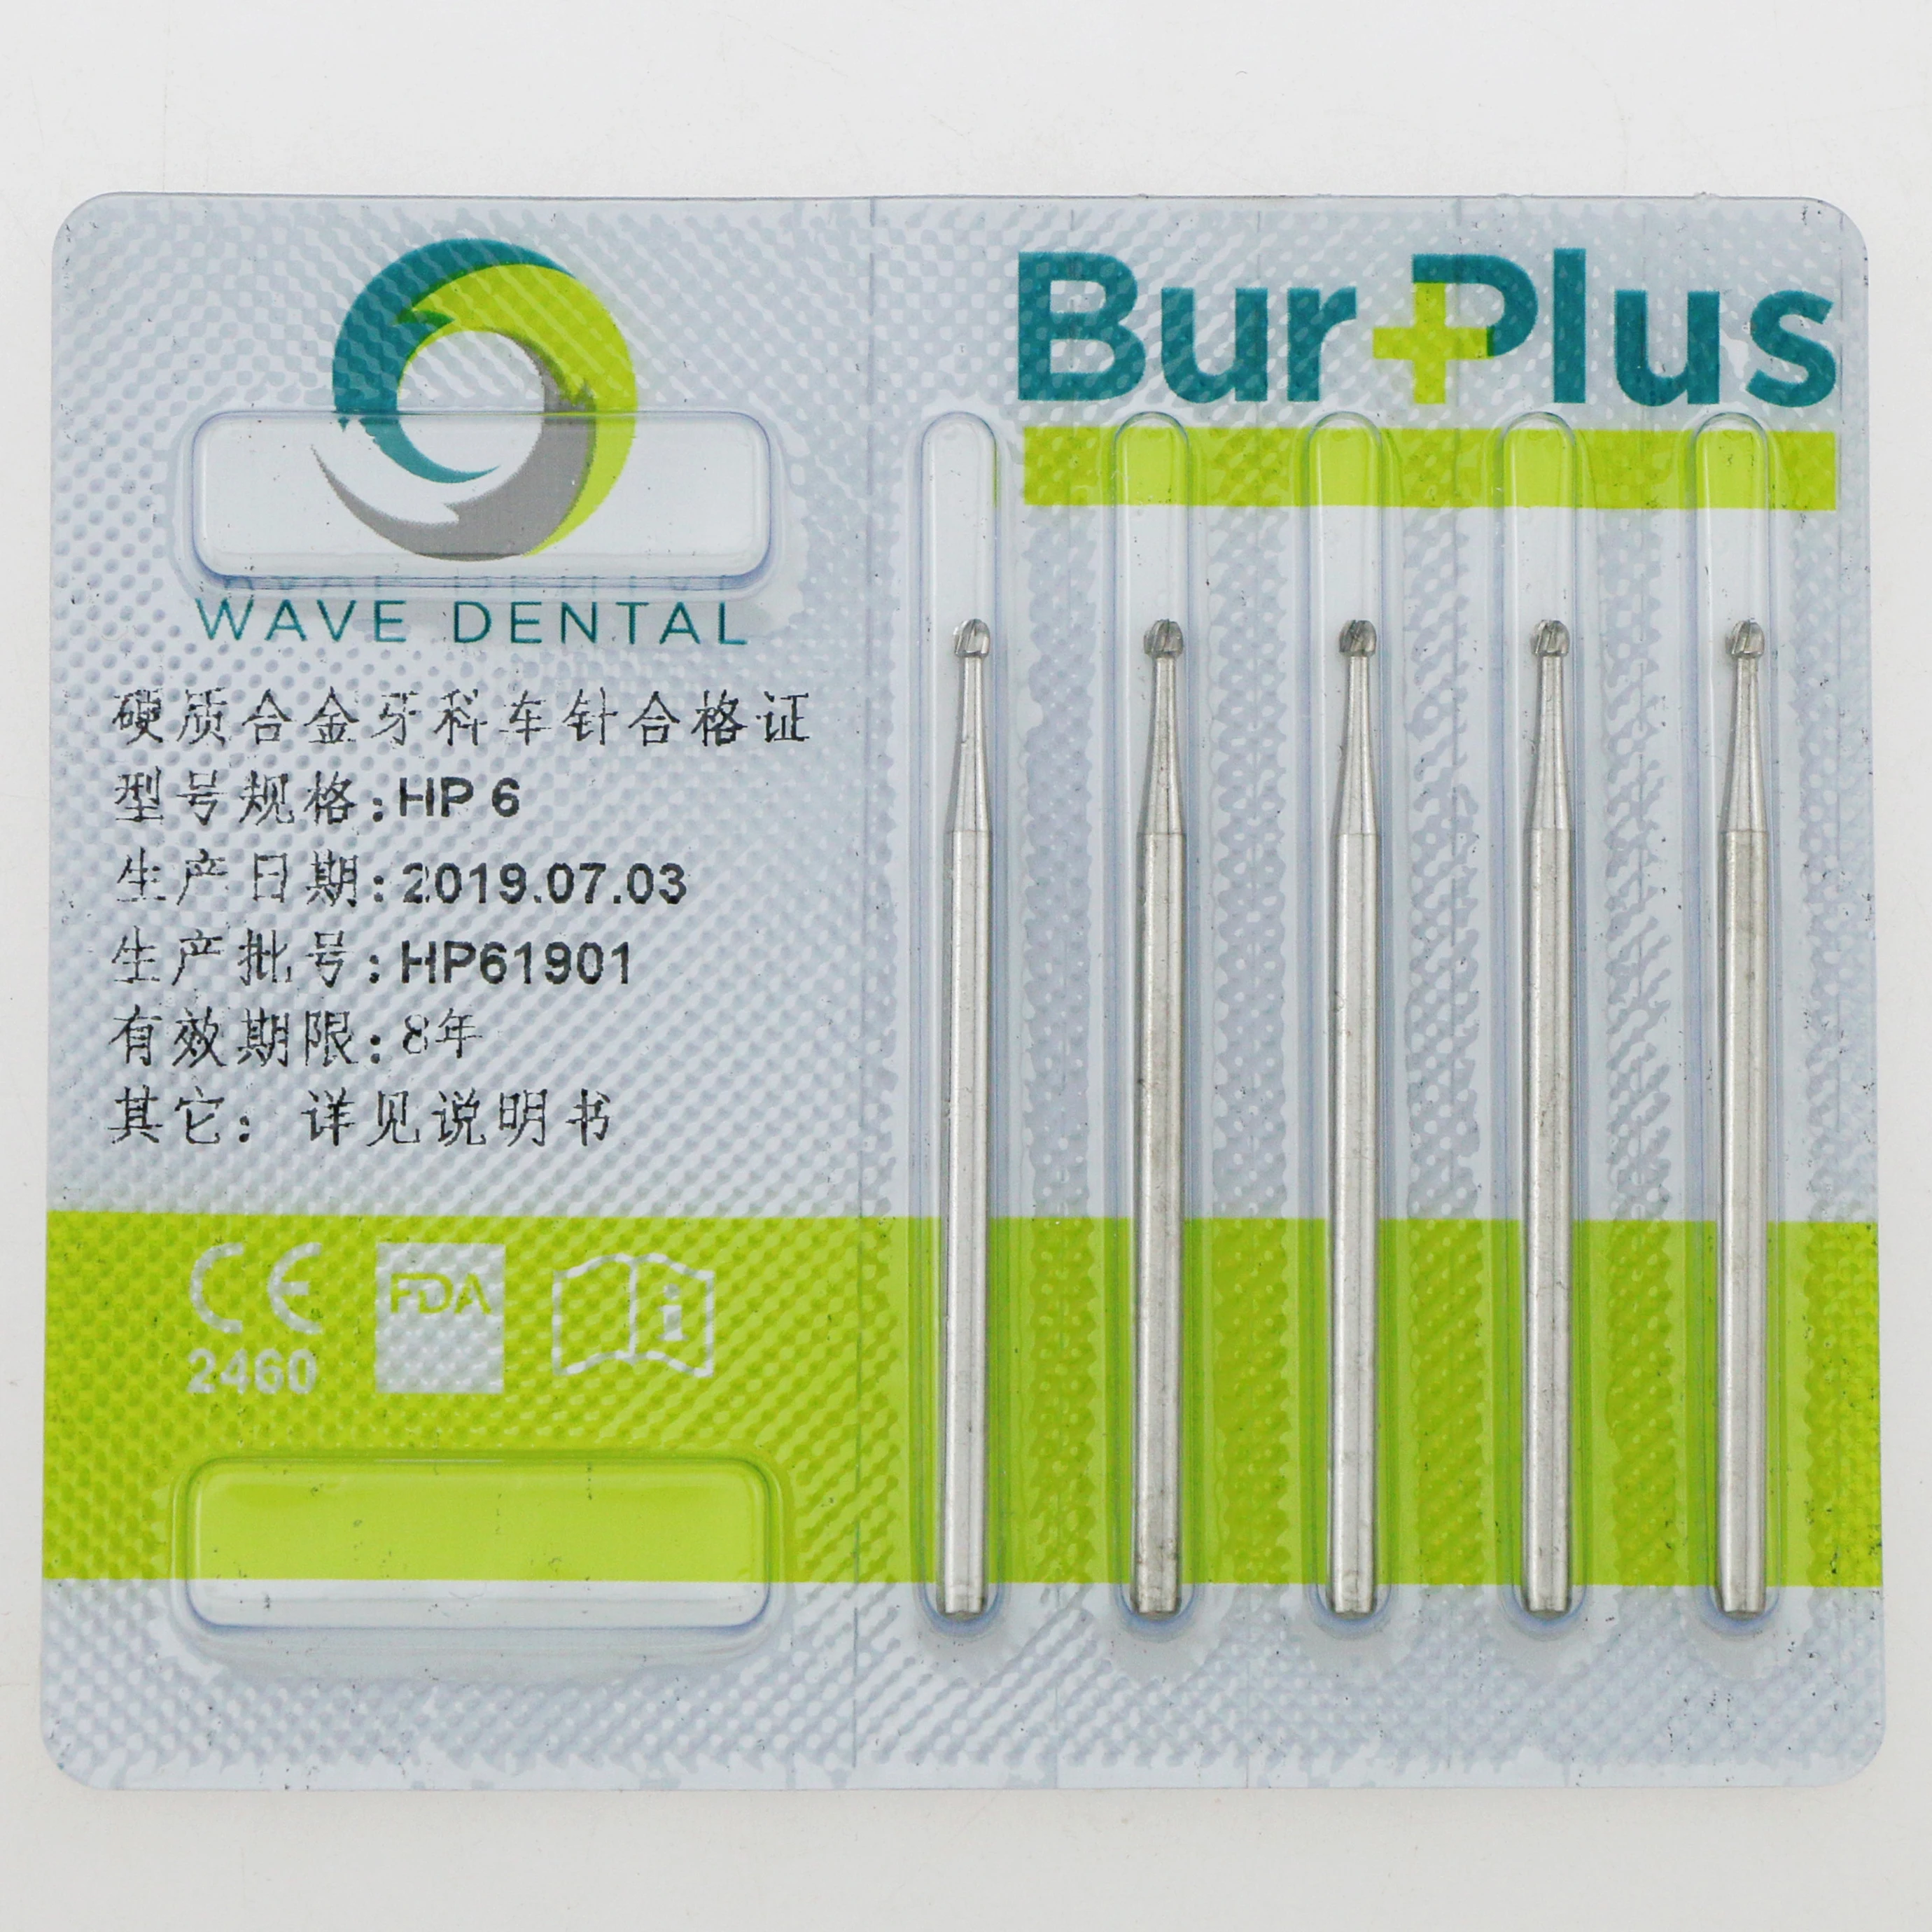 5Pc/Pack WAVE Dental Tungsten Carbide Bur HP 6 Head 1.8mm Round Drills Burs For Low Speed Straight Nose Cone Handpiece 2.35mm air prophy dent al polish handpiece dent al prophy motor and nose cone dent al air polisher jet